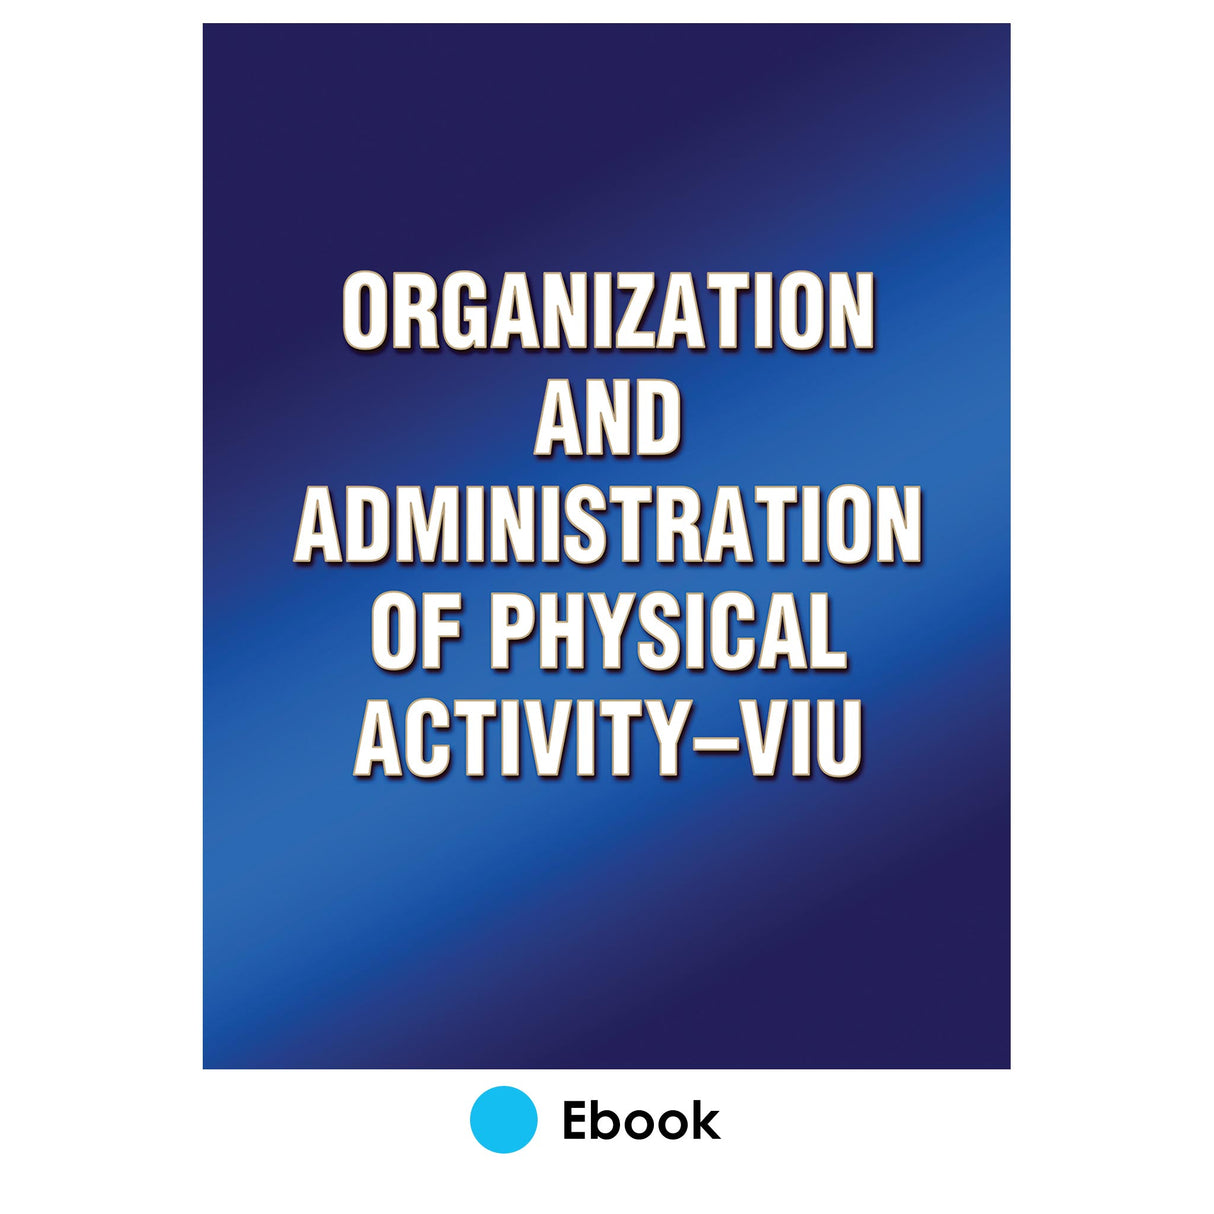 Organization and Administration of Physical Activity-VIU